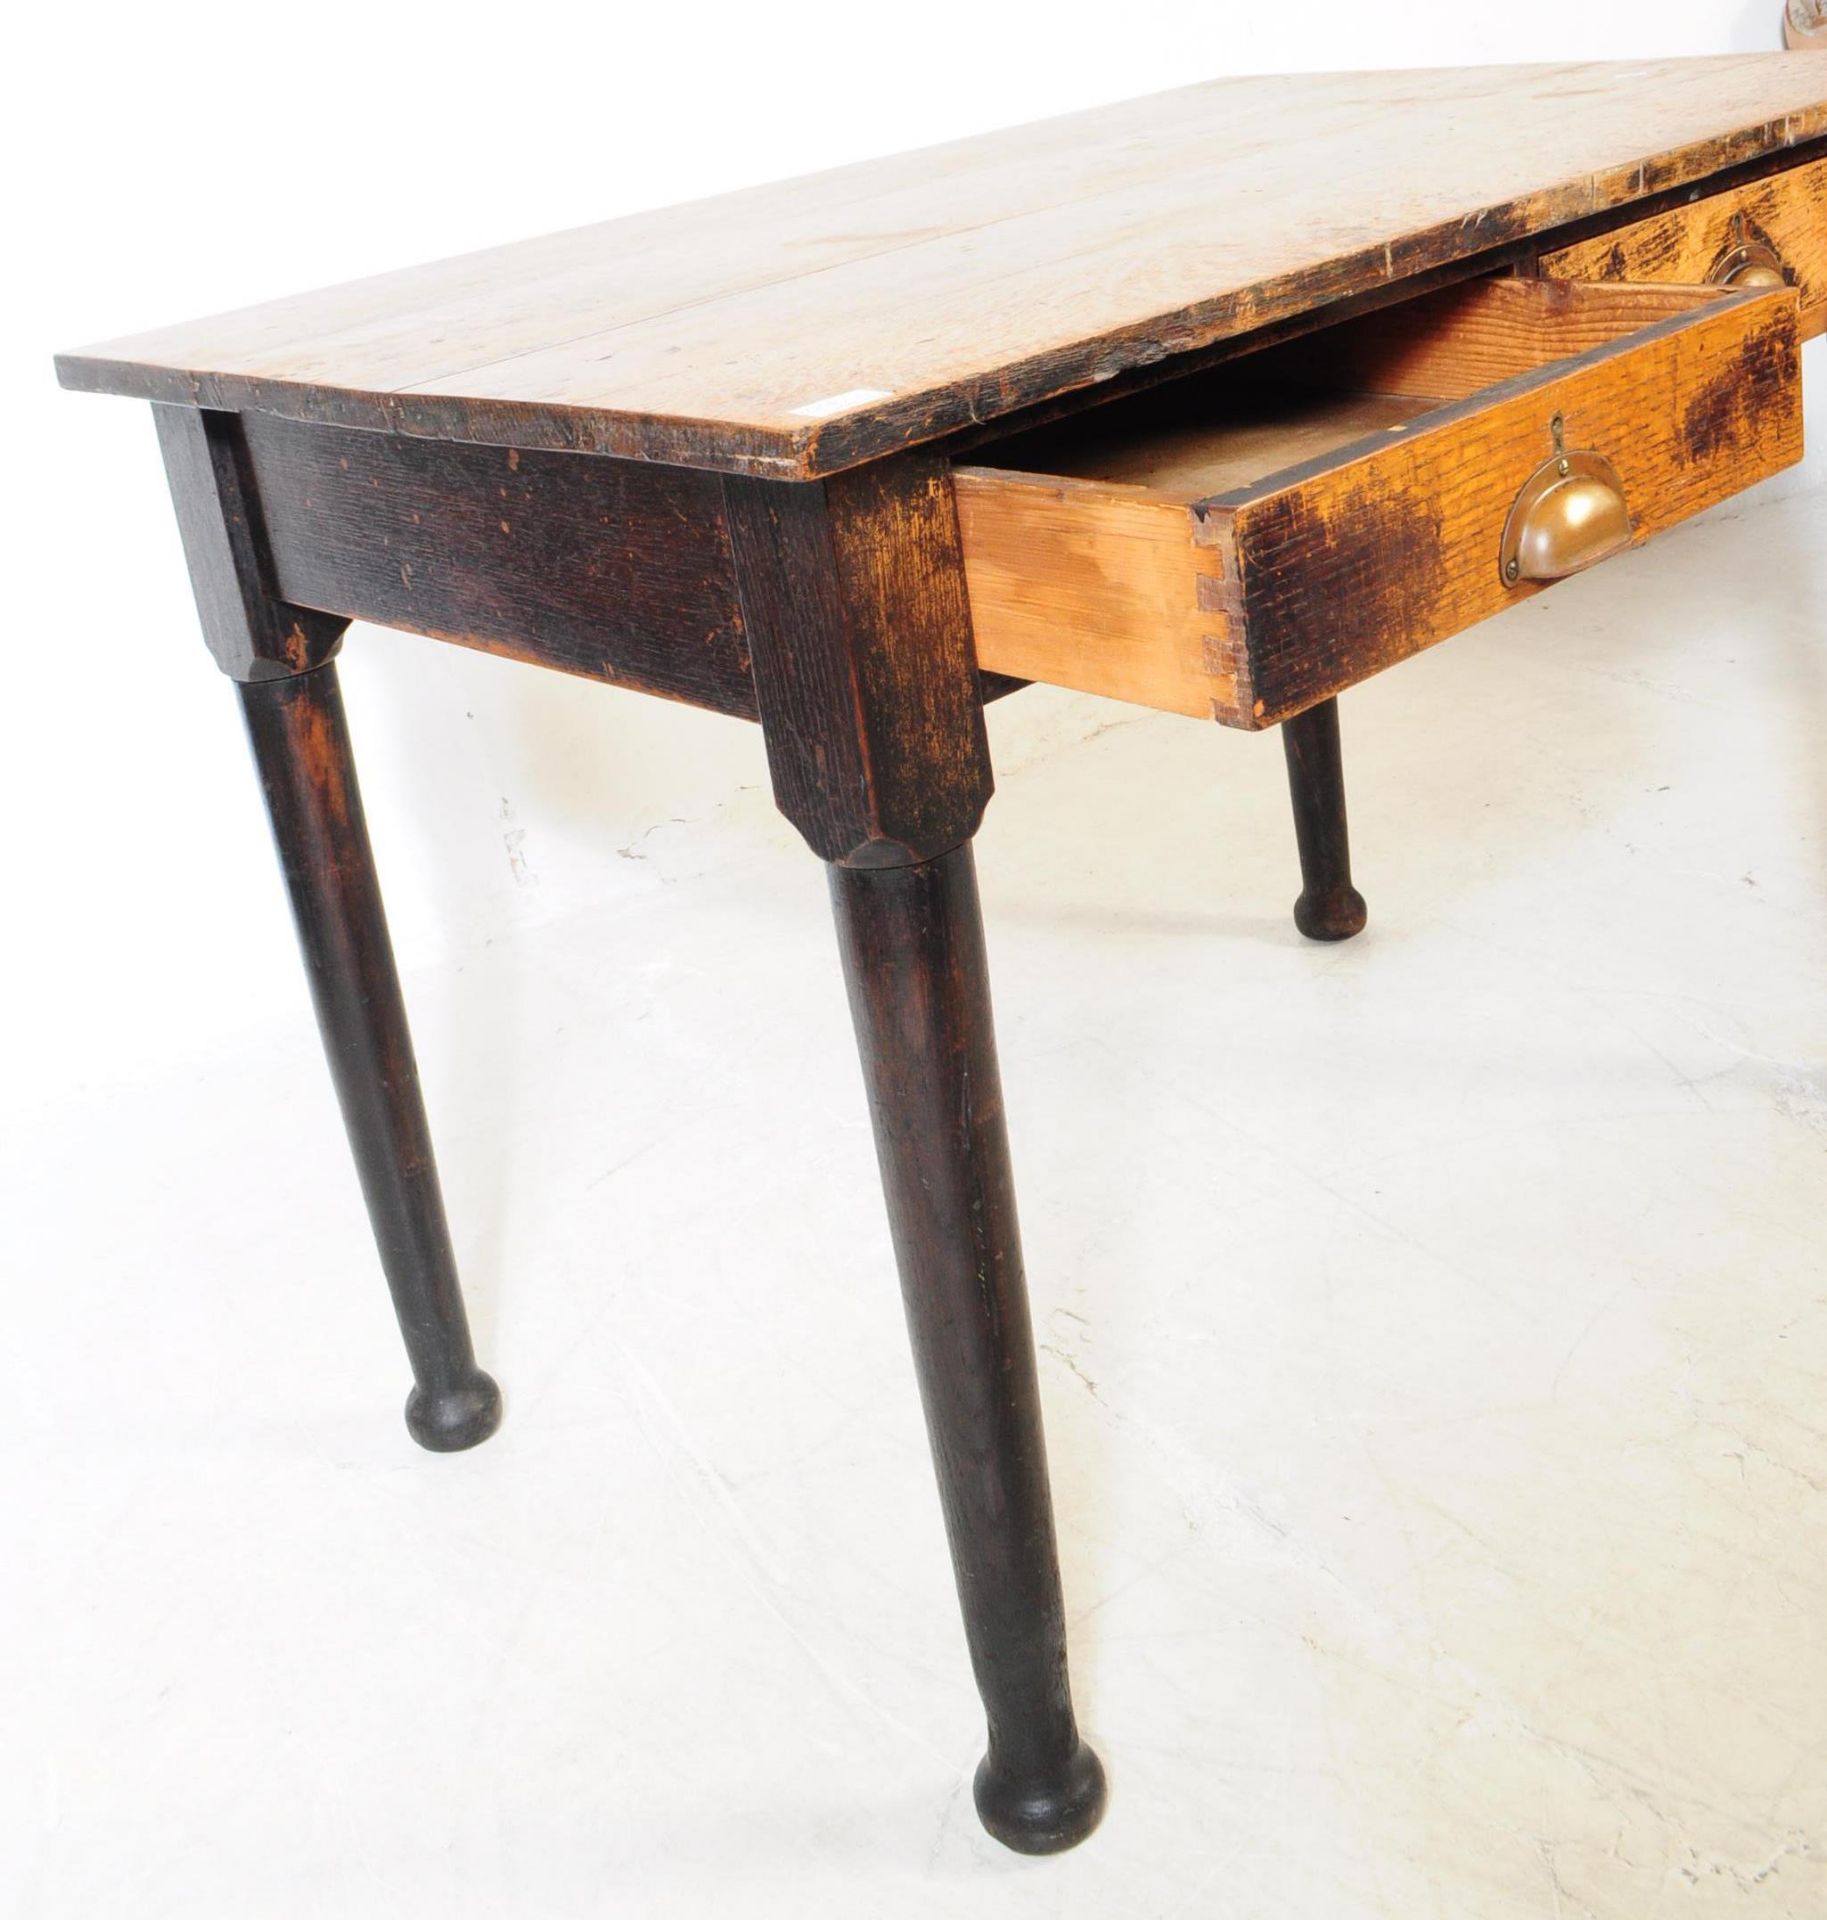 19TH CENTURY VICTORIAN OAK WRITING TABLE DESK - Image 3 of 4